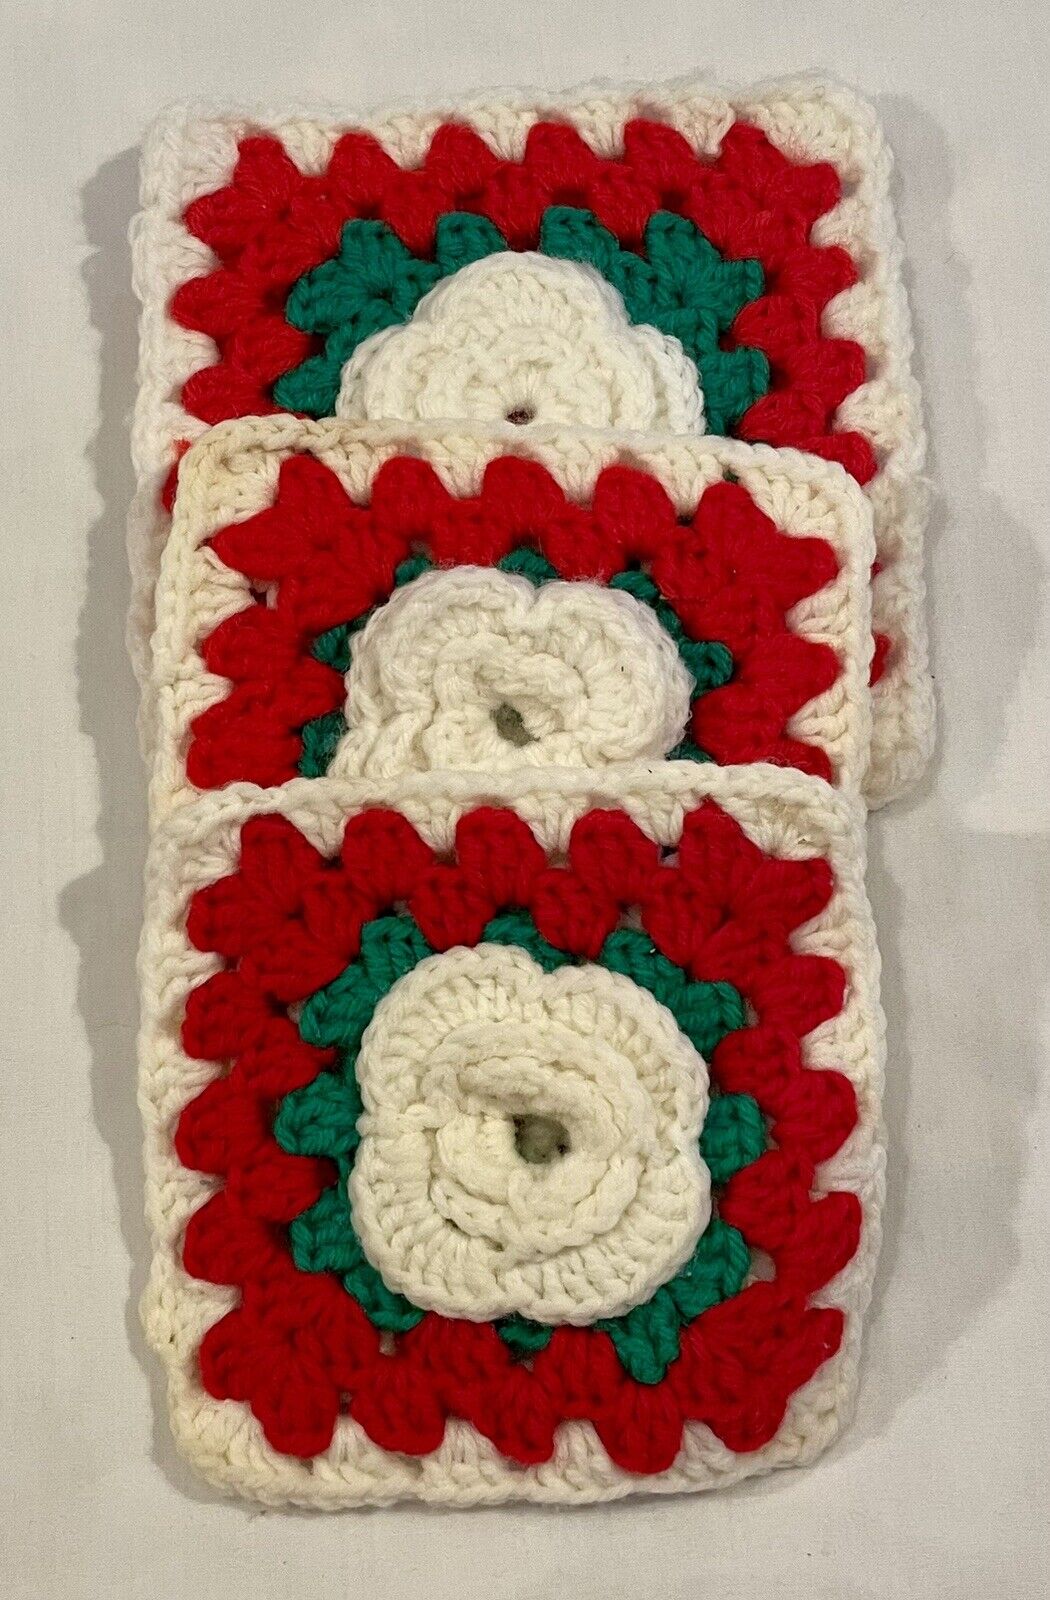 Lot of 3 Vintage Knit Crocheted Pot Holders  Hot Pad Homemade Christmas